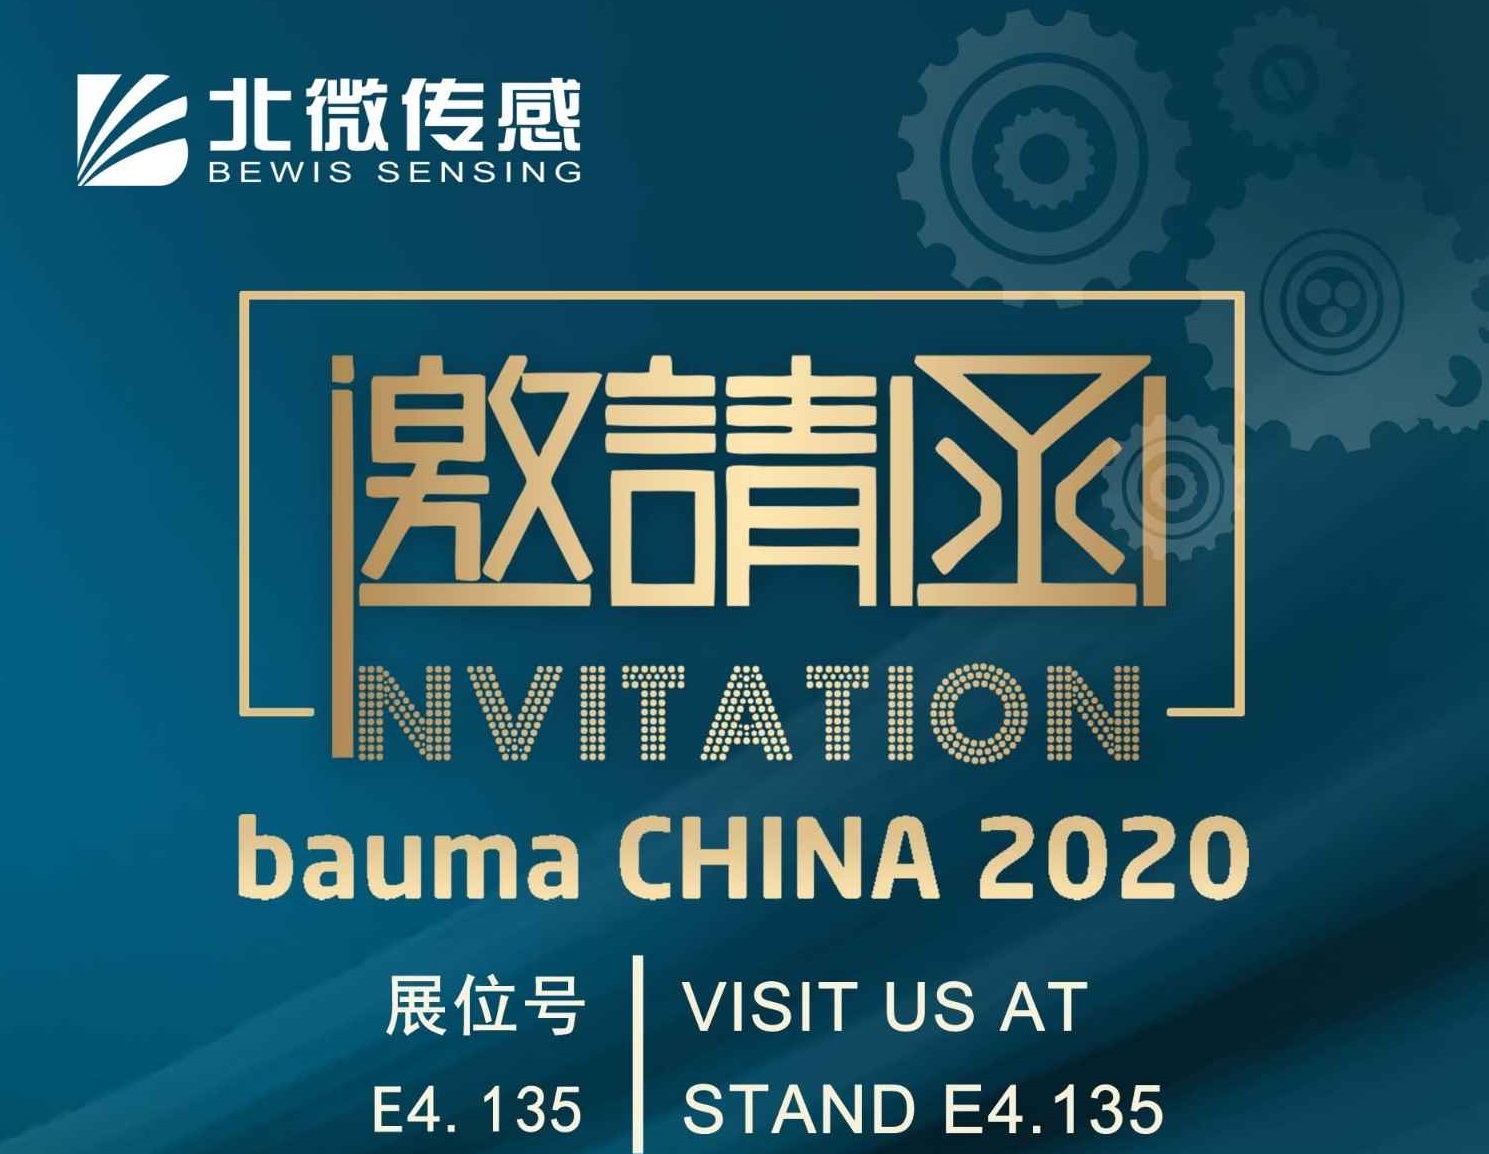 Welcome to BWSENSING's bauma exhibition